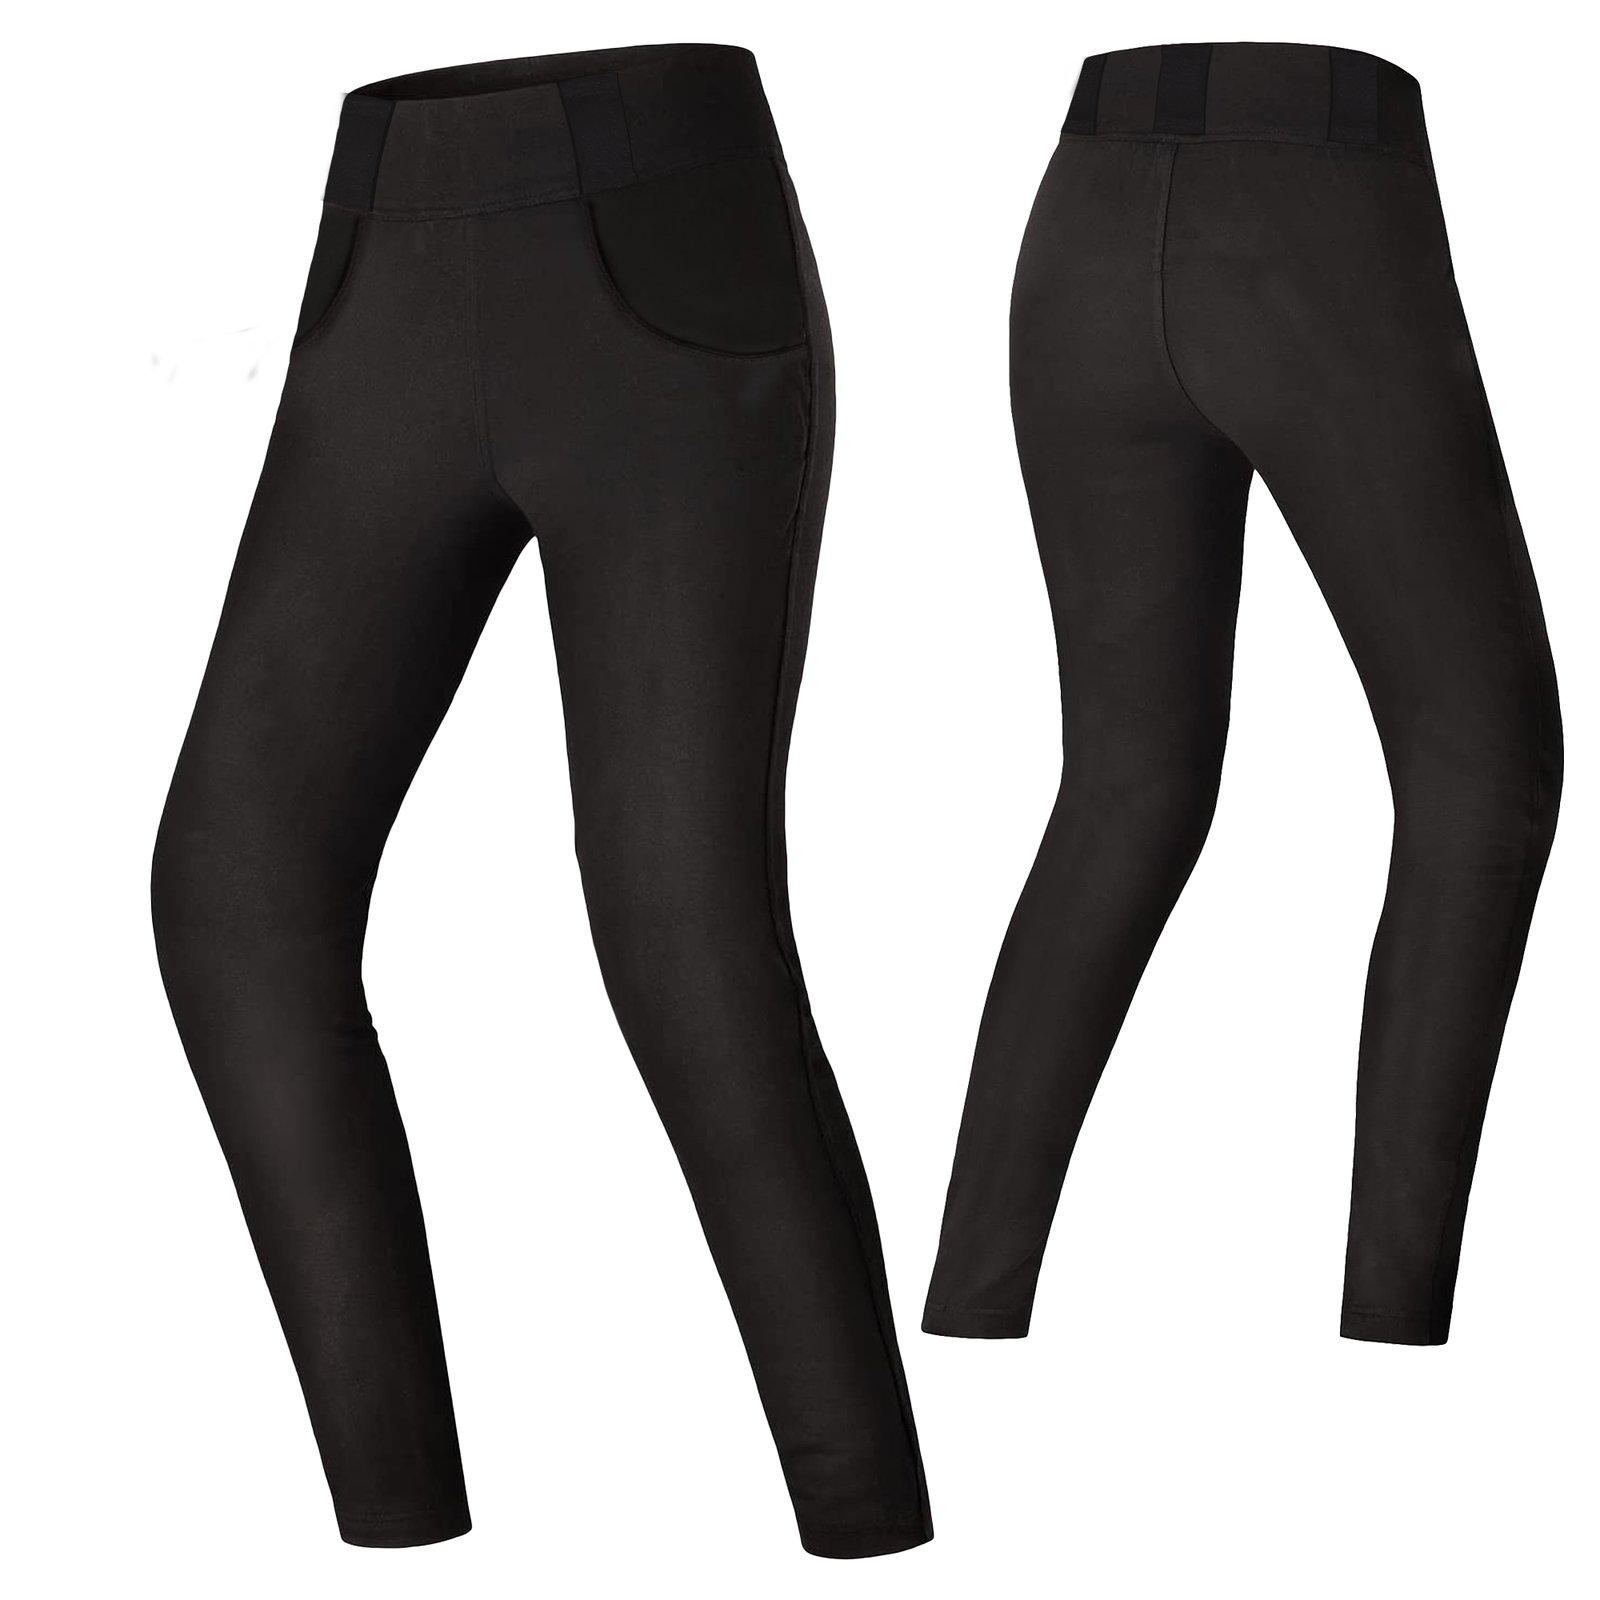 Tights and Leggings Guide | Learn the Features and Benefits